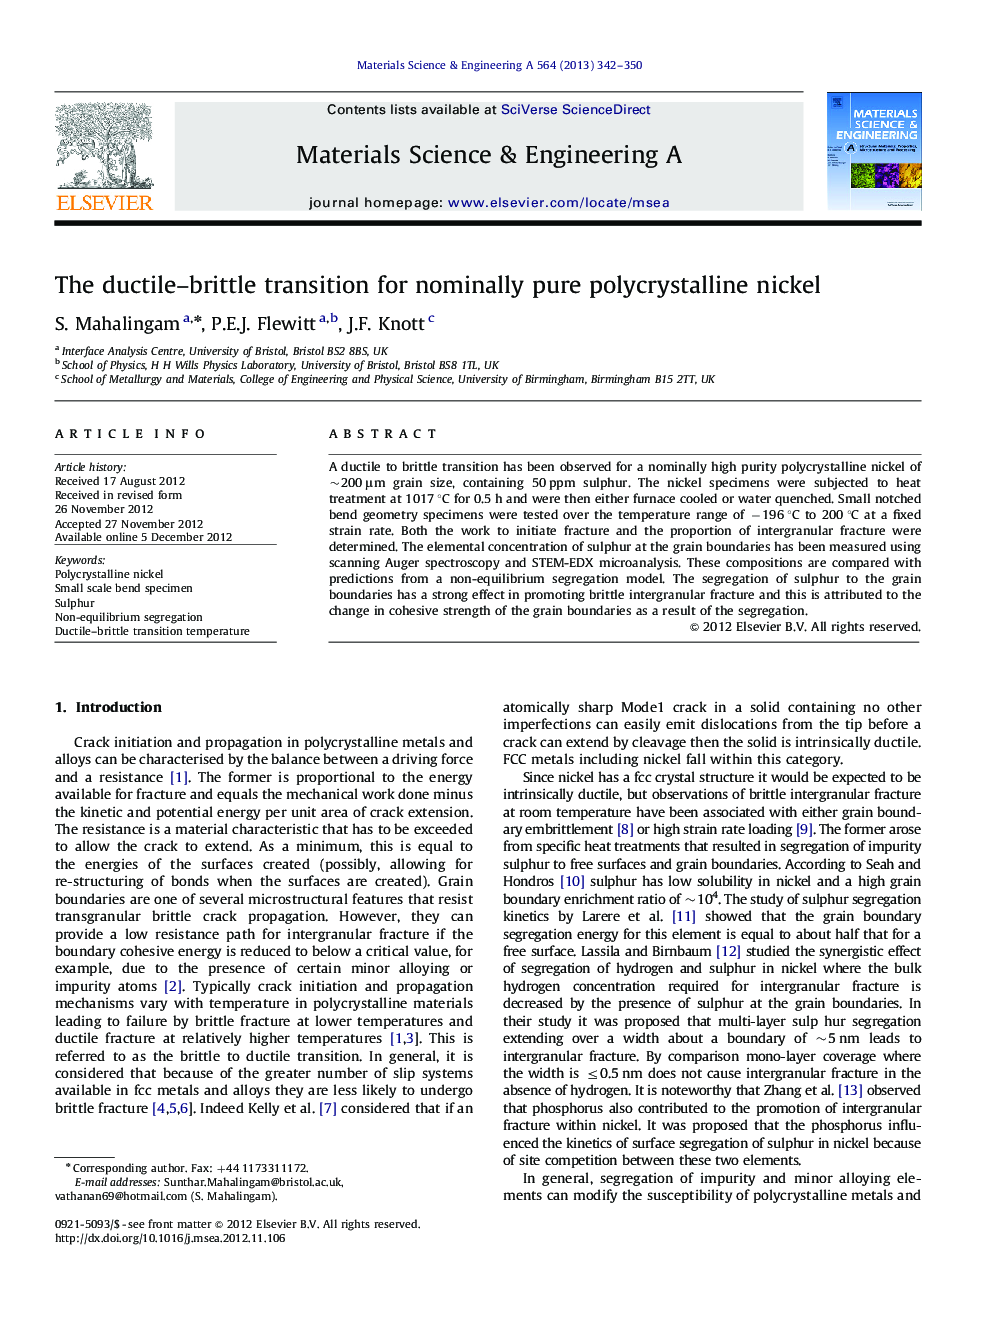 The ductile-brittle transition for nominally pure polycrystalline nickel